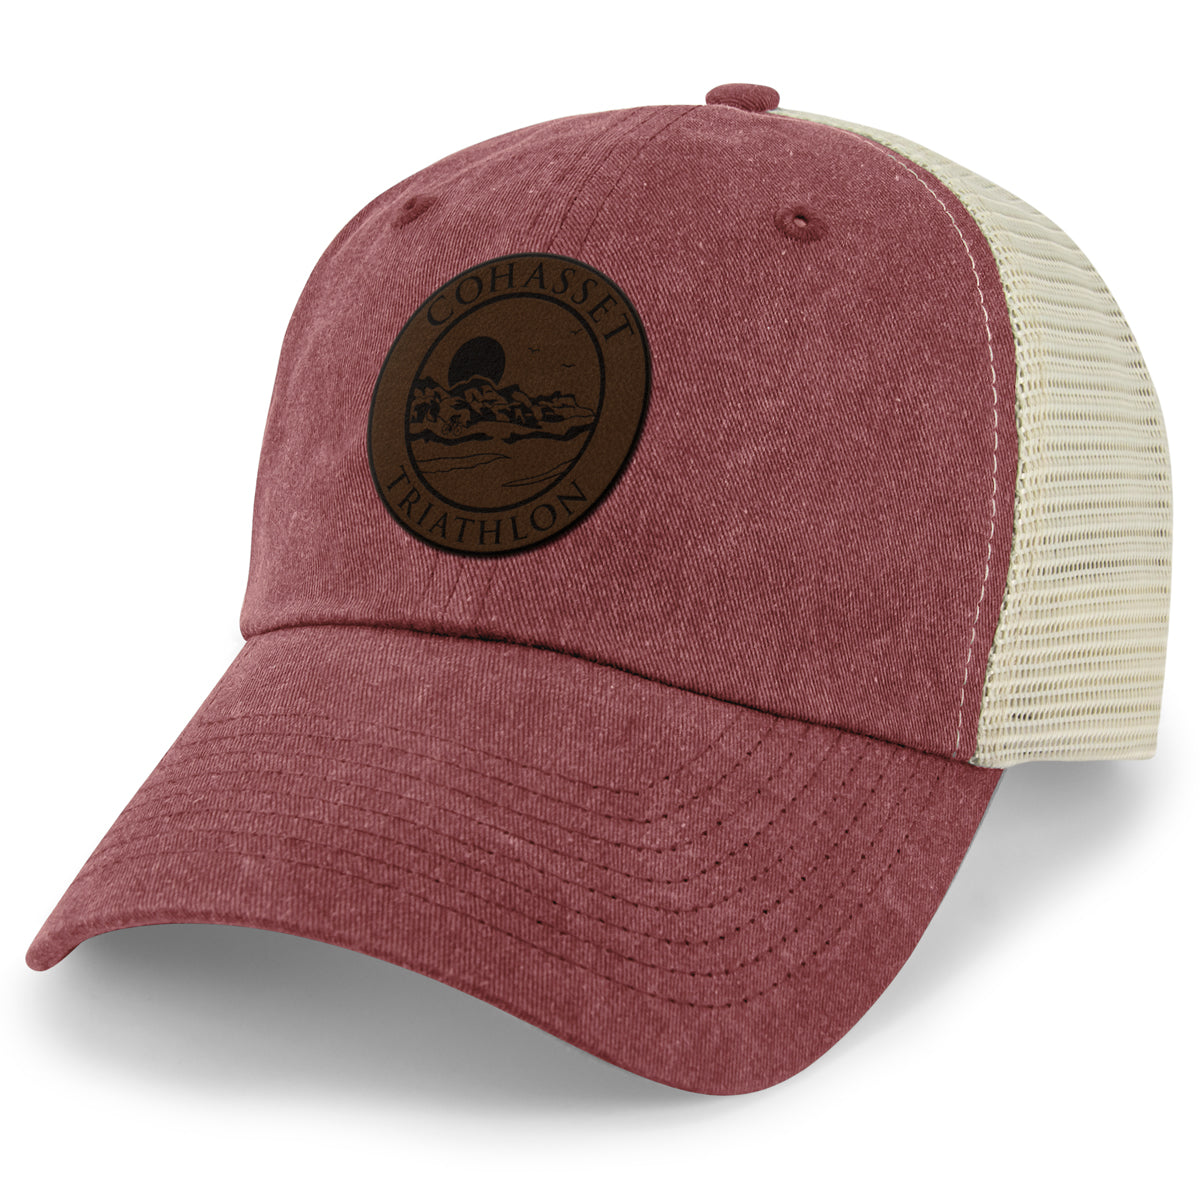 Cohasset Triathlon Leather Patch Relaxed Trucker - Chowdaheadz